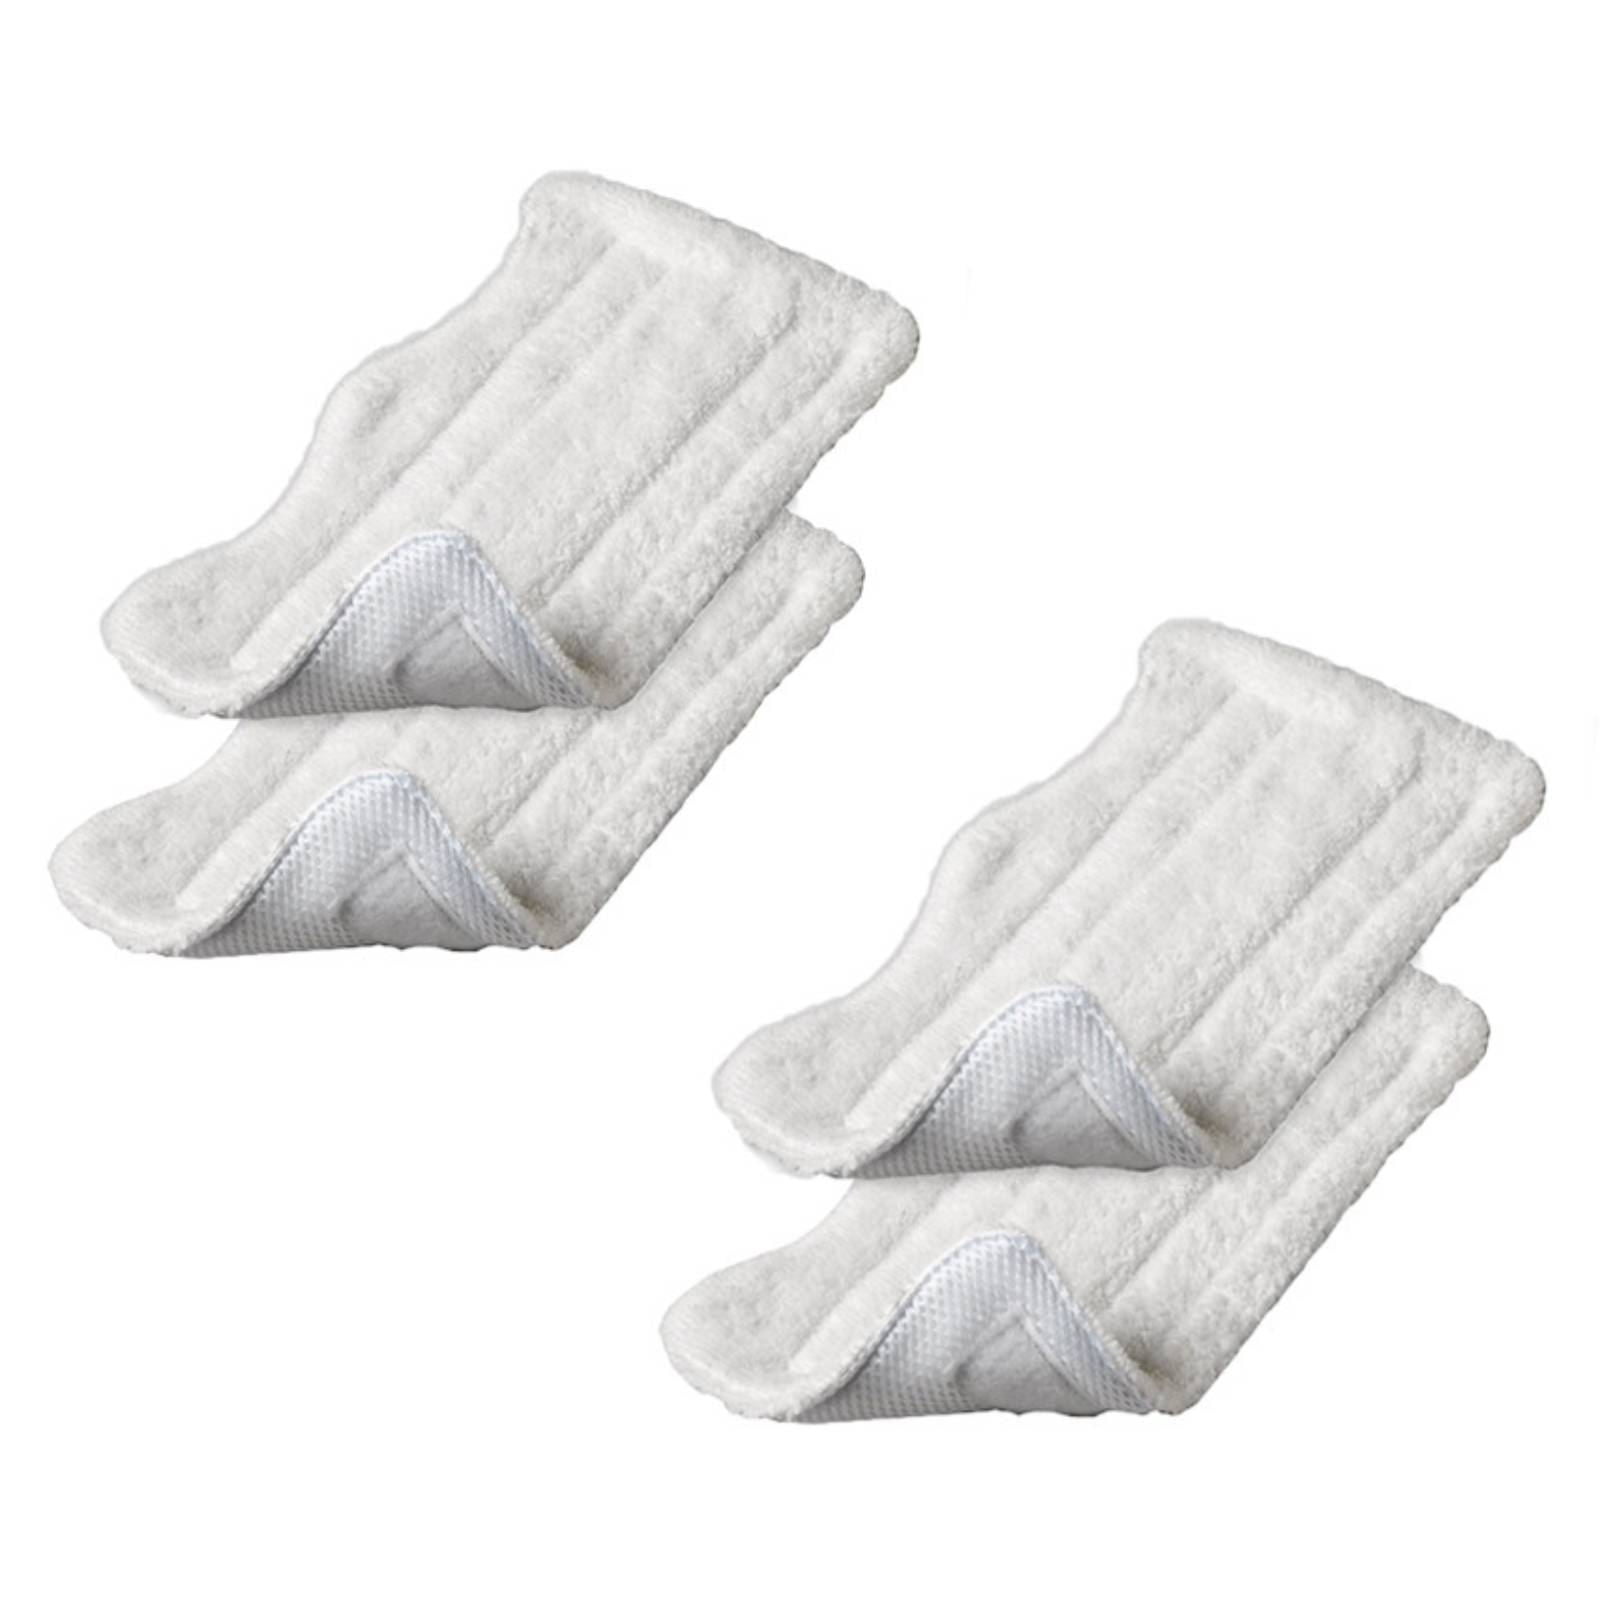 Steam Mop Pads for Euro Pro Shark Microfiber Pad Replacement 8,4 or 1 Clean Co 